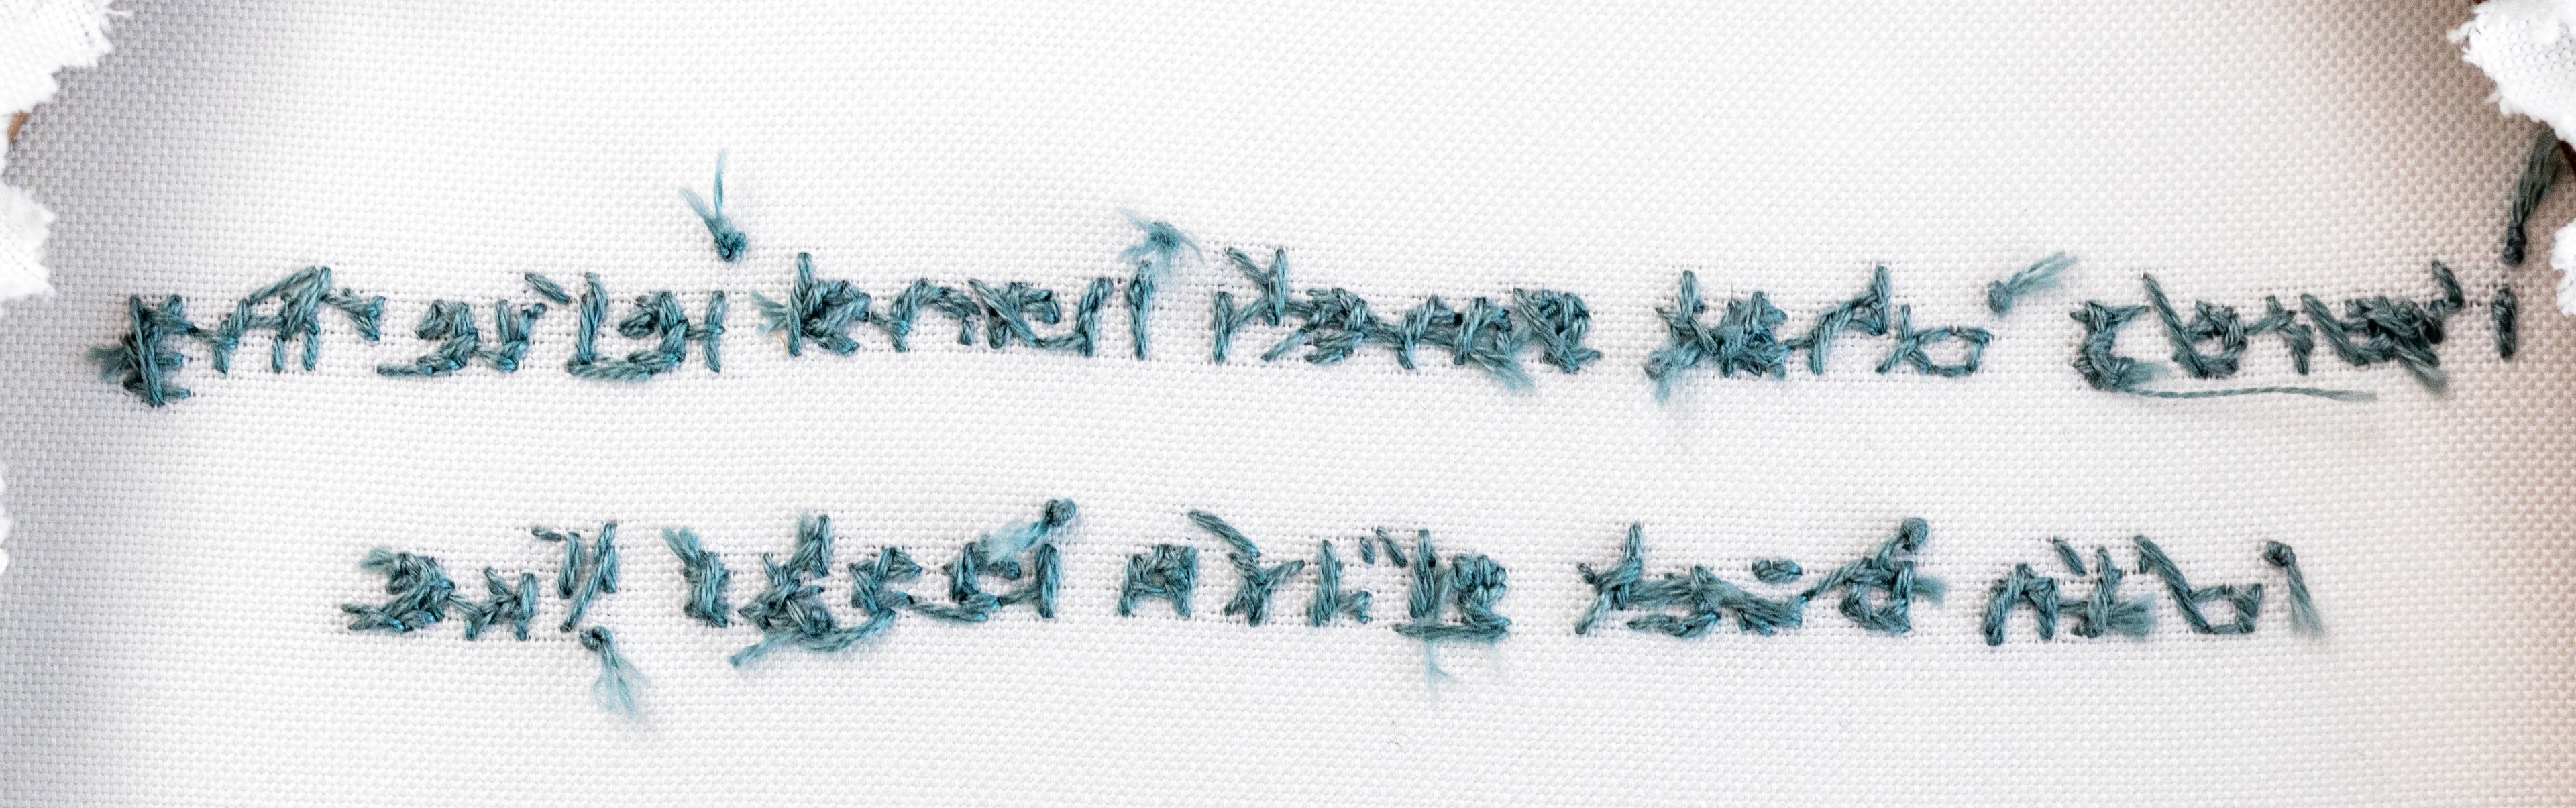 This is the back of a sentence stitched with modern embroidery lettering.